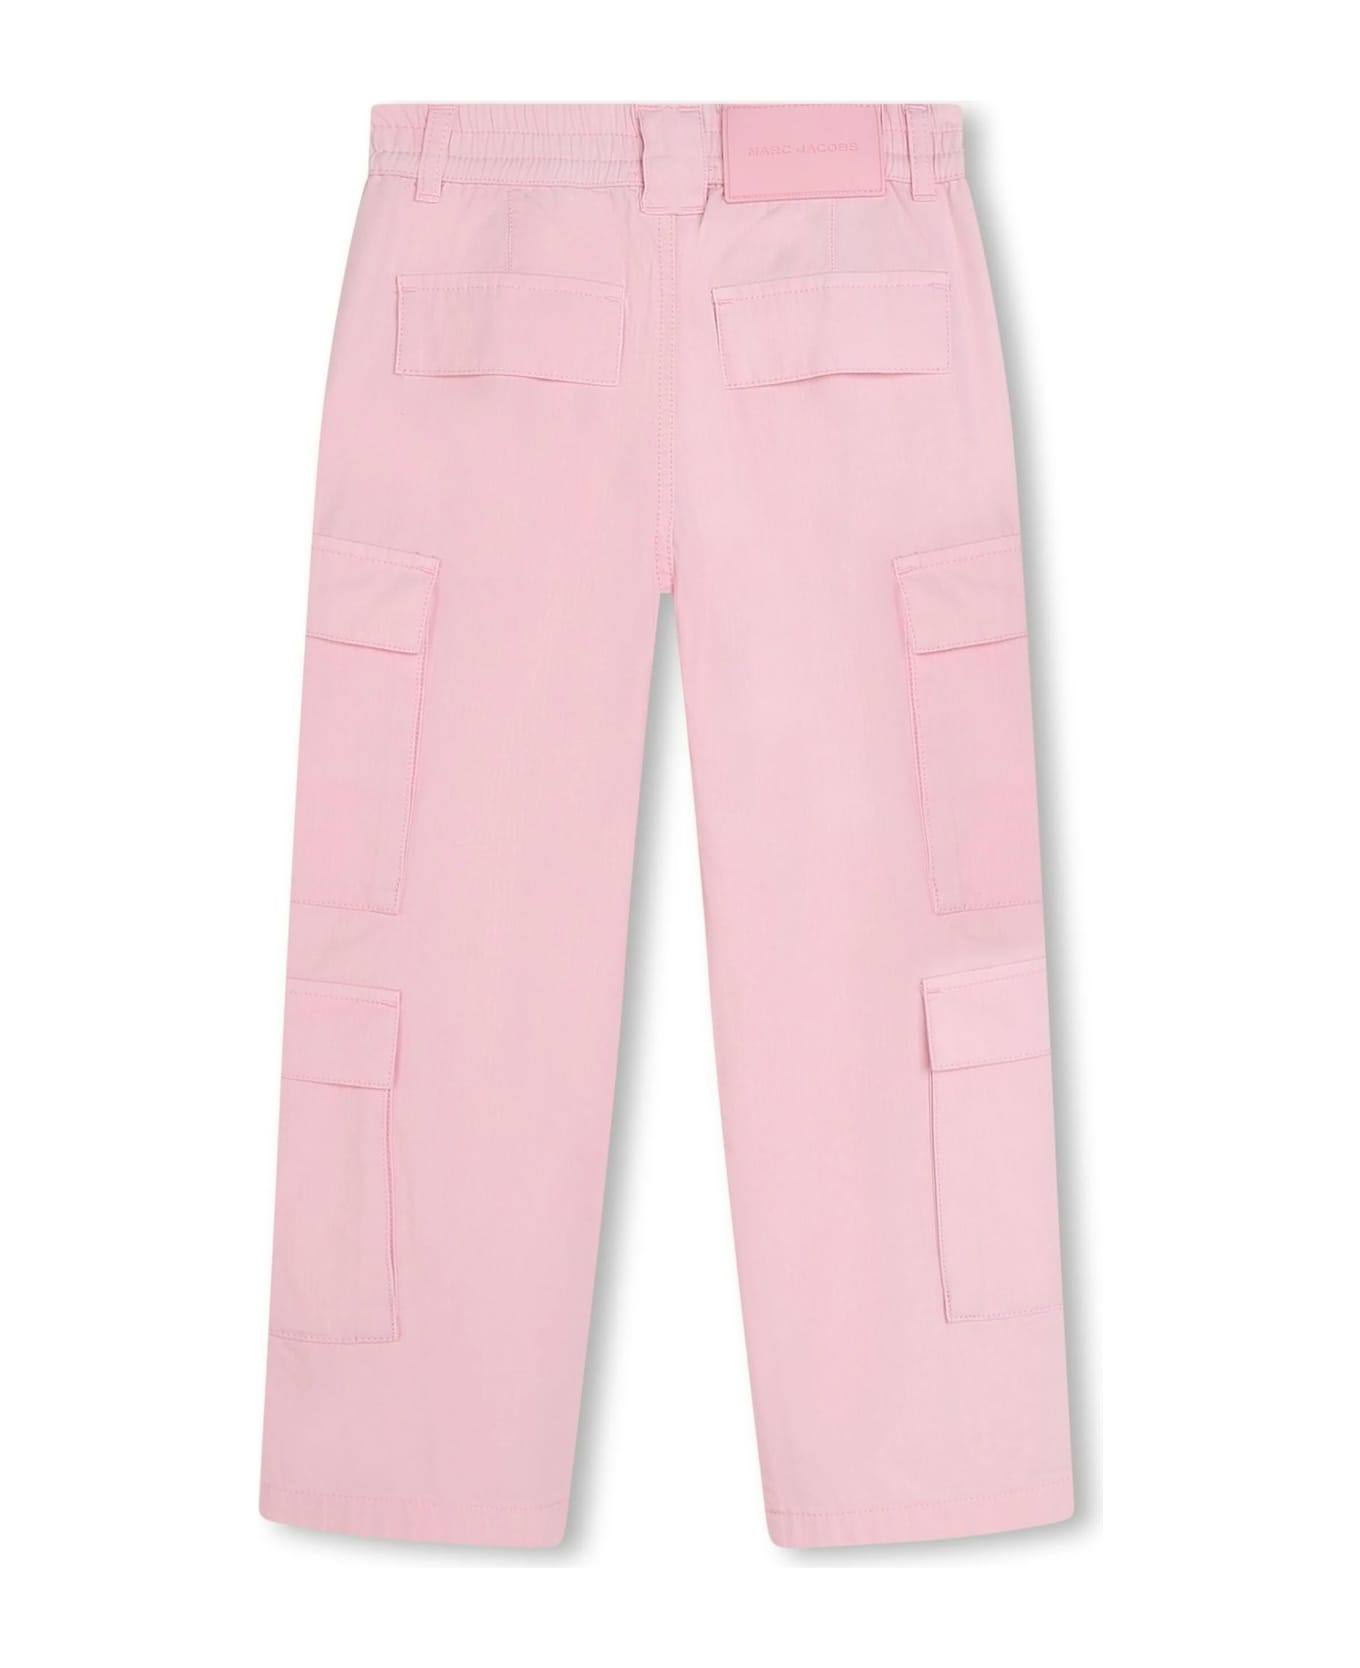 Marc Jacobs Trousers Pink - Pink ボトムス